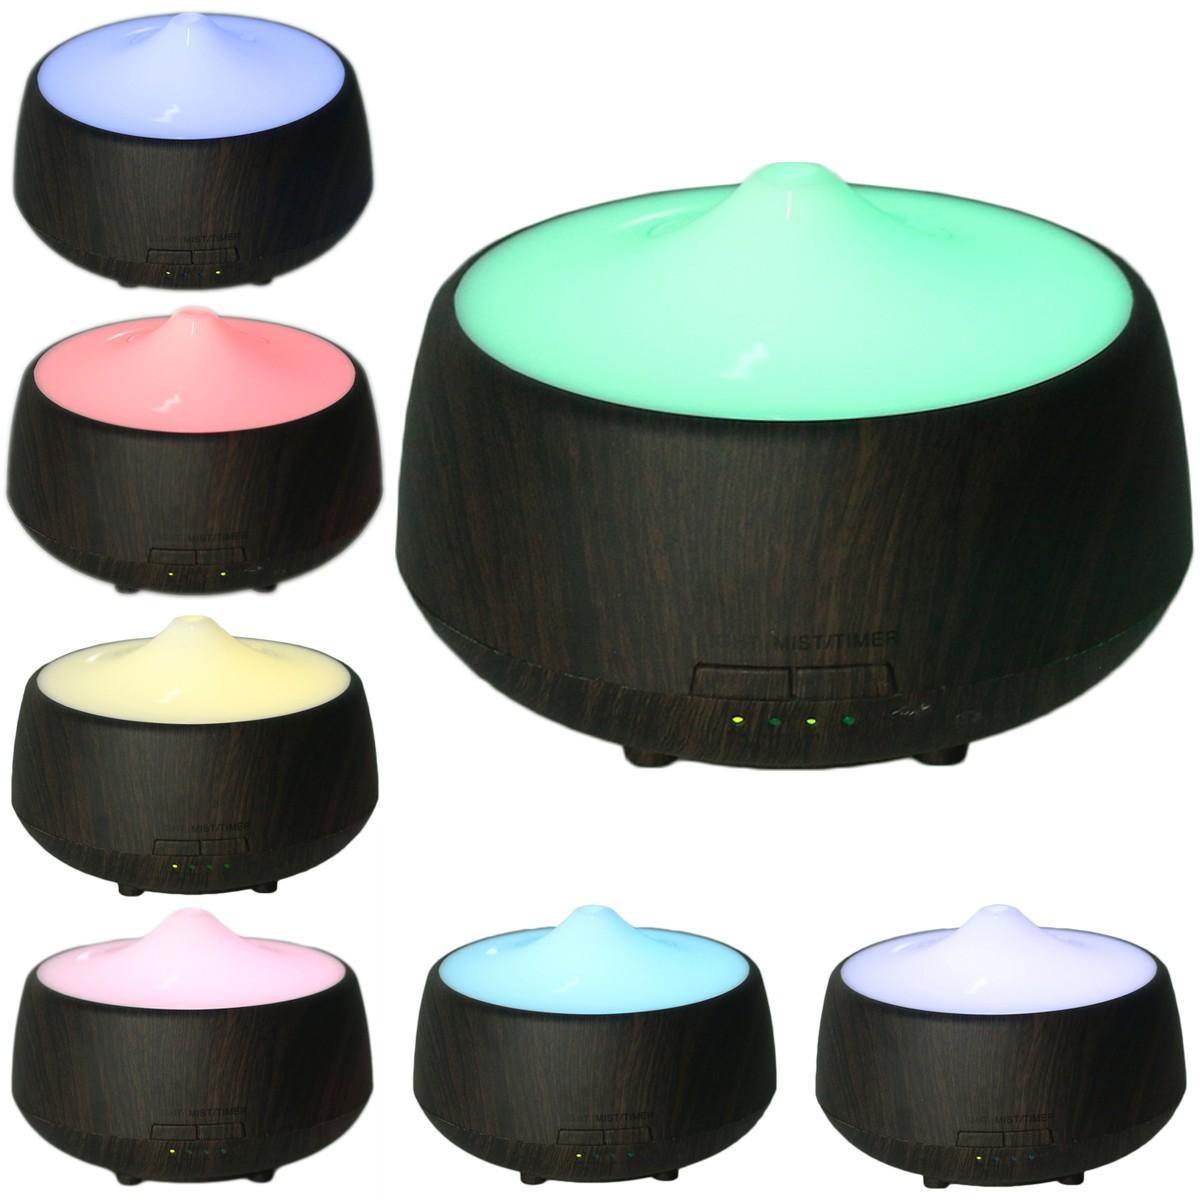 110-240V 7 Color LED Ultrasonic Air Humidifier Aroma Atomizer Diffuser Steam Air Purifier, Banggood  - buy with discount